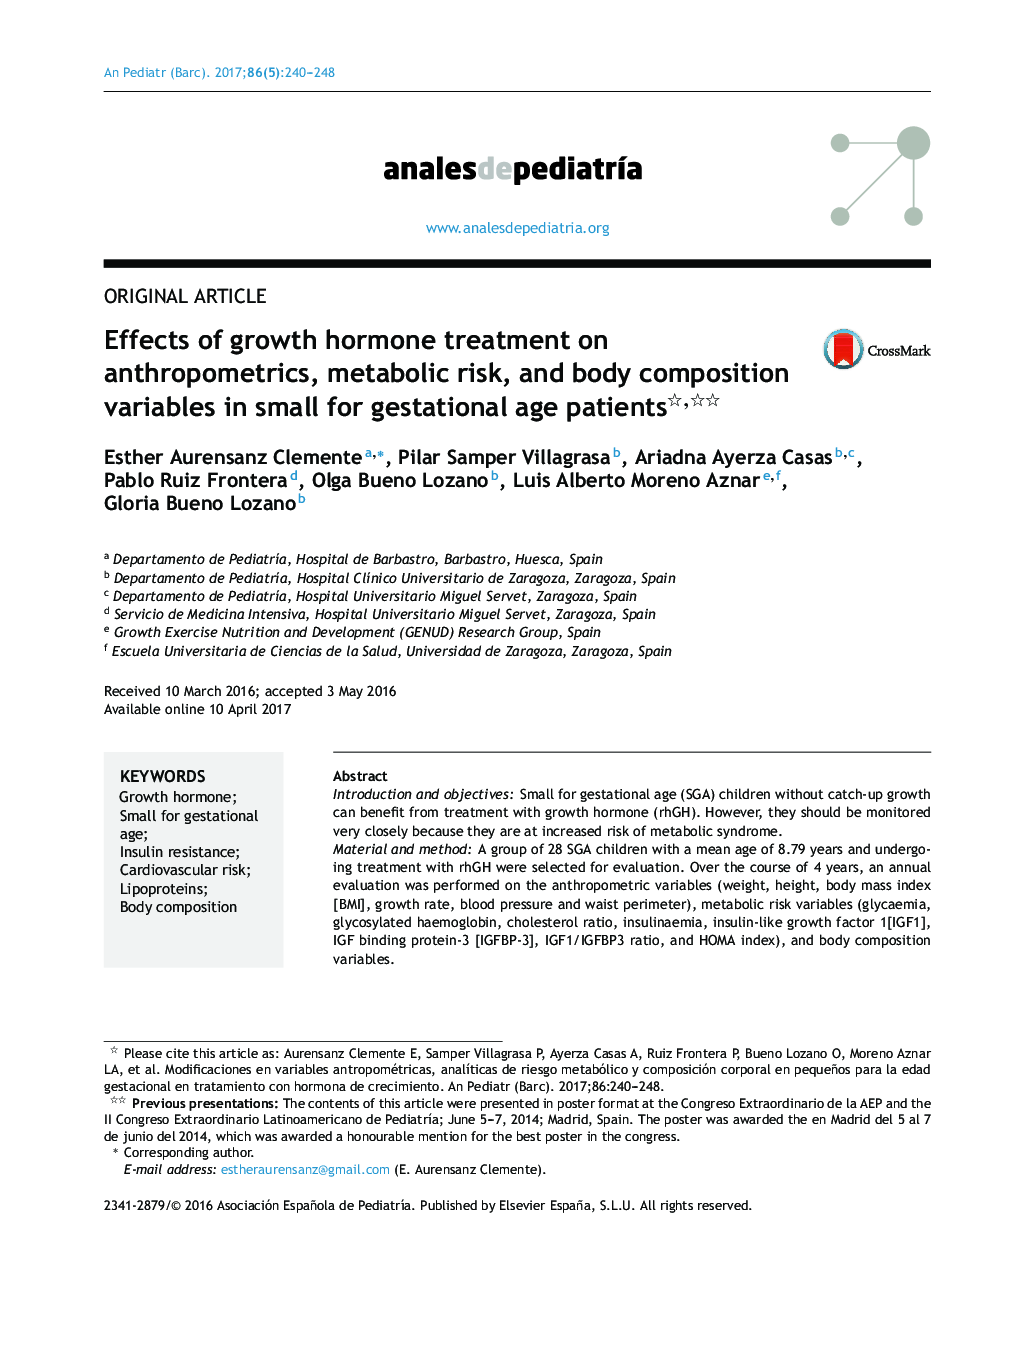 Effects of growth hormone treatment on anthropometrics, metabolic risk, and body composition variables in small for gestational age patients